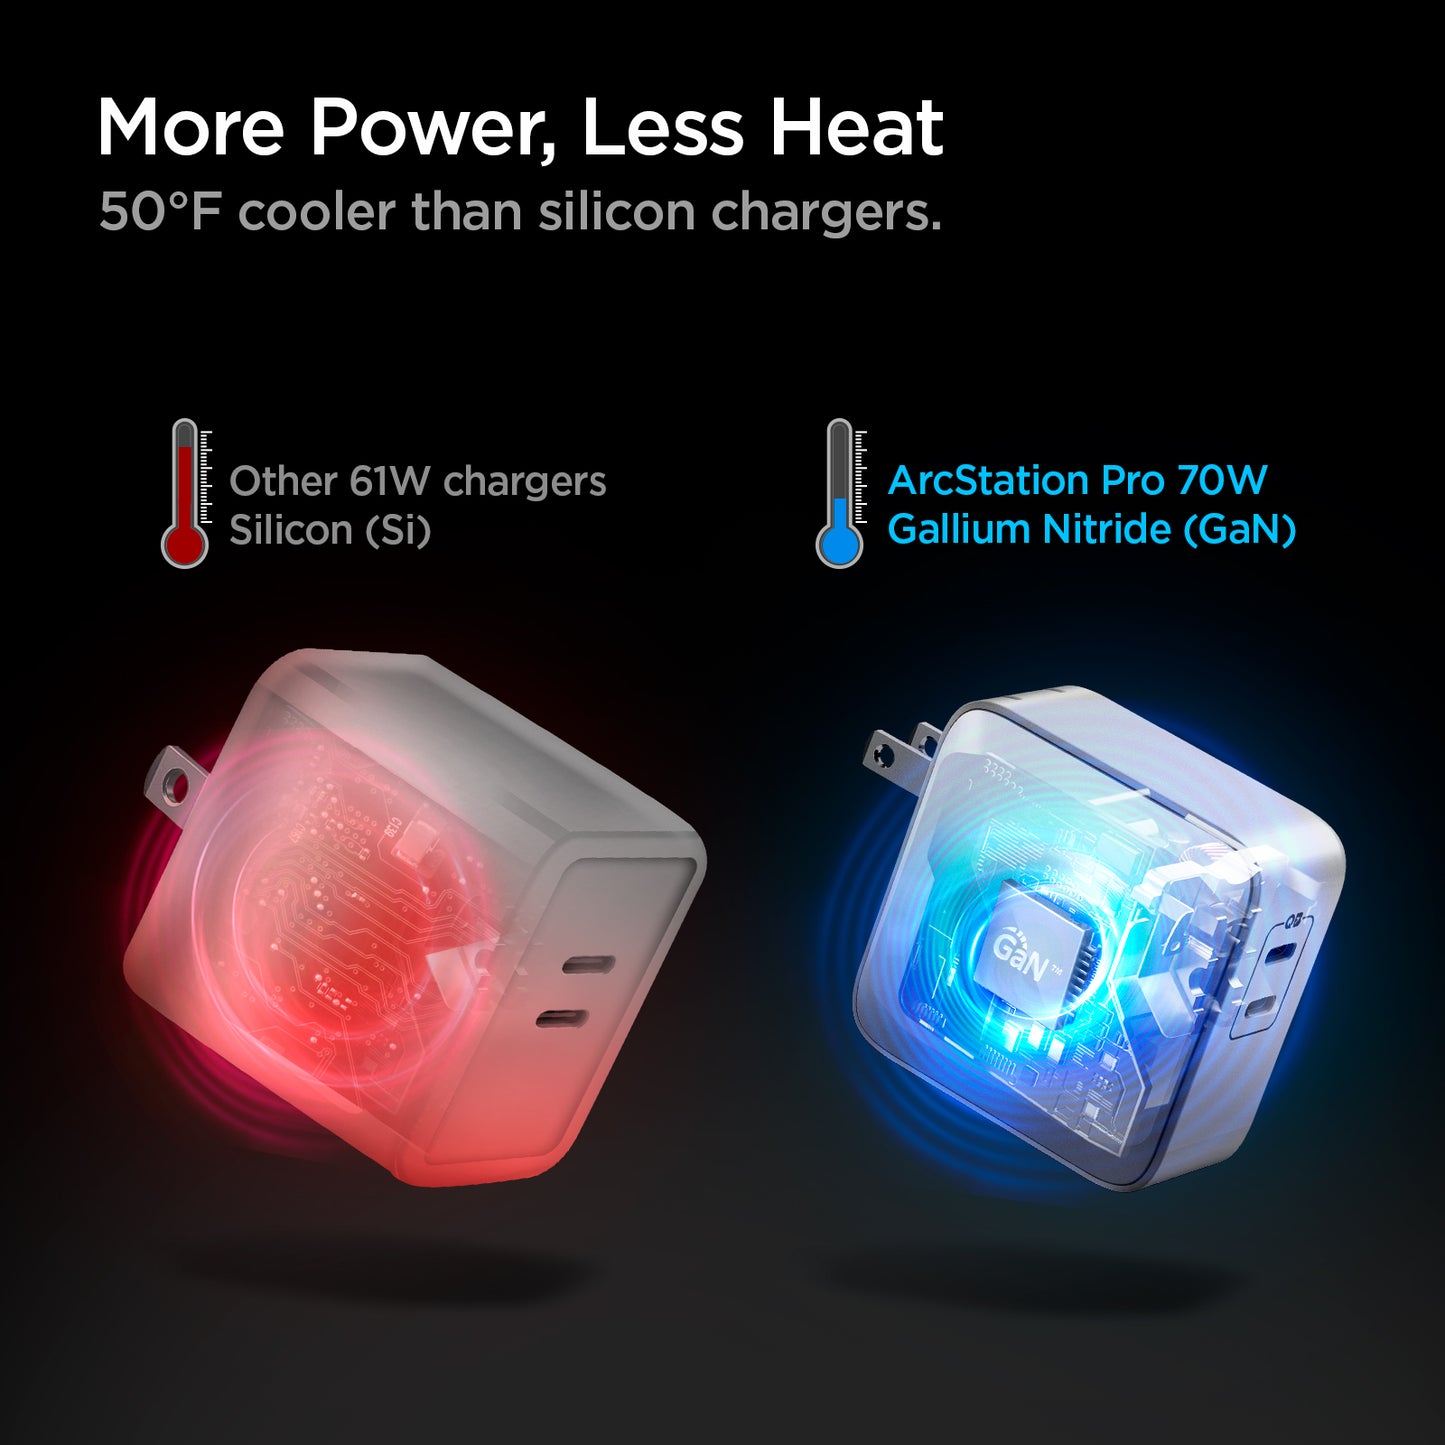 ACH02081 - ArcStation™ Pro GaN 70W Dual Port Wall Charger PE2007 in White showing More Power, Less Heat, 50°F cooler than silicon charges. Comparing others with 61W chargers Silicon with AS Pro 70W GaN